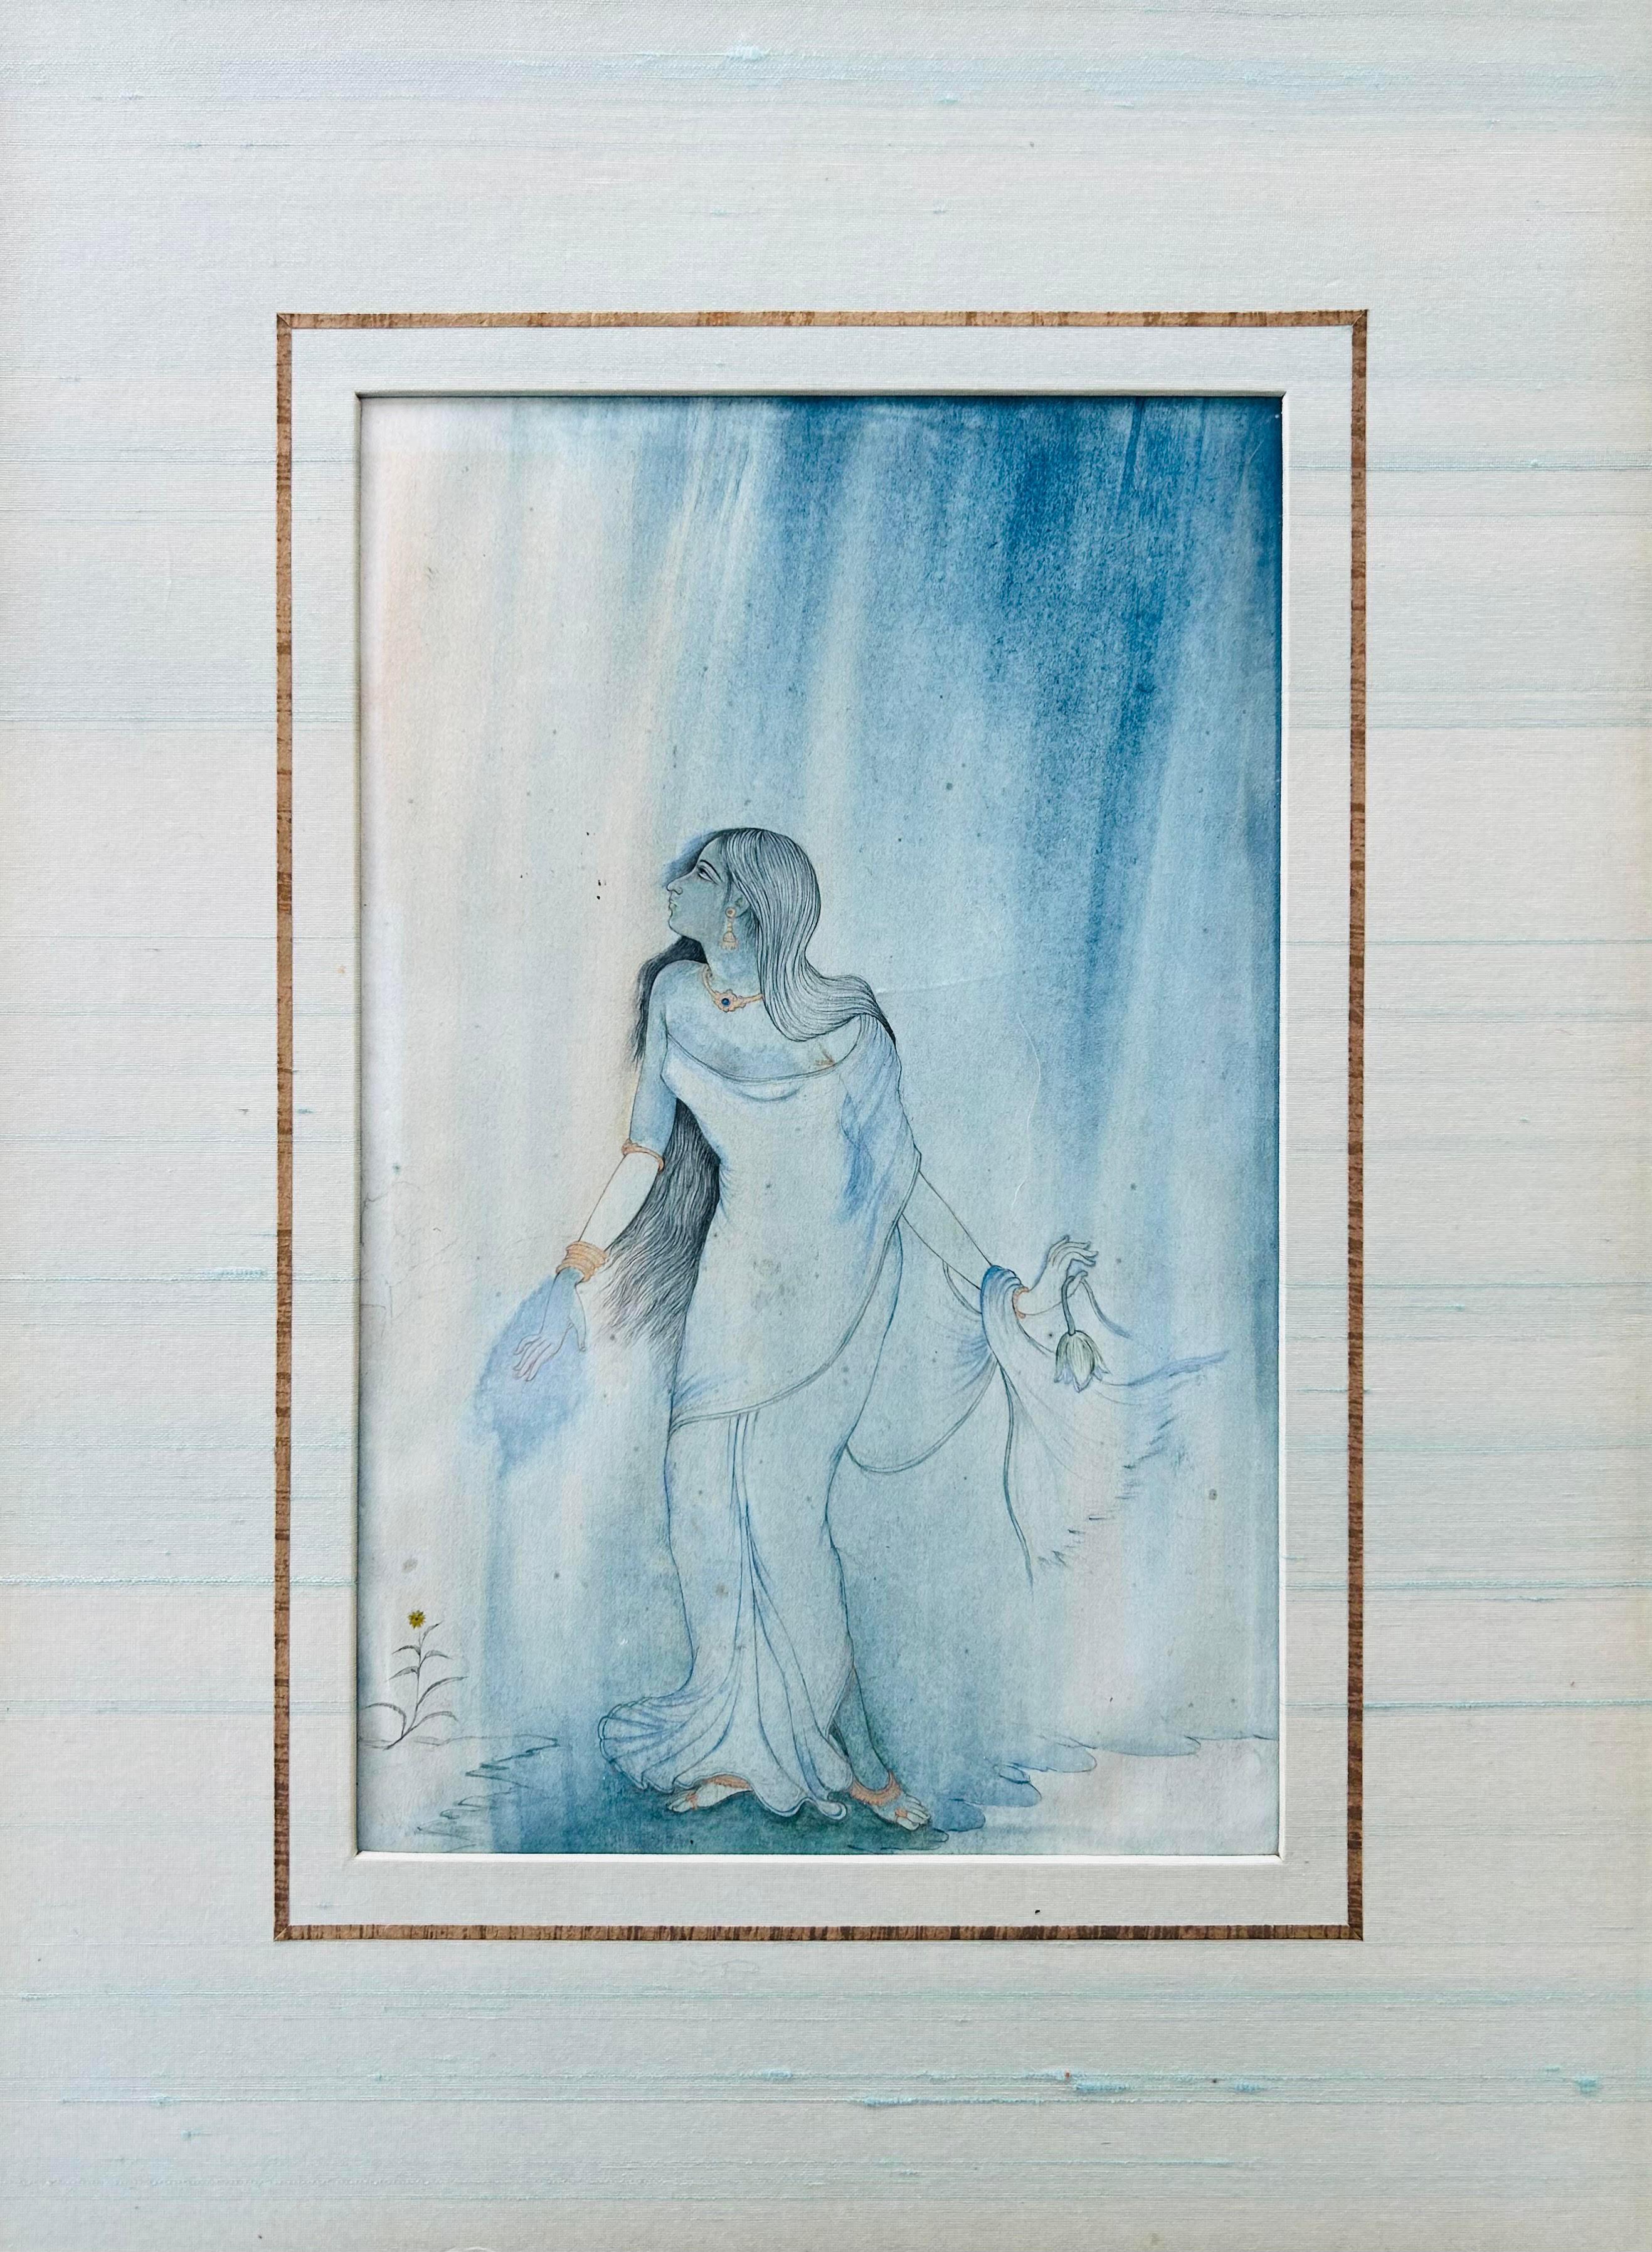 Two Bengal School wash Watercolours Signed and Dated 1917 Calcutta Tagore N Bose - Other Art Style Painting by Unknown